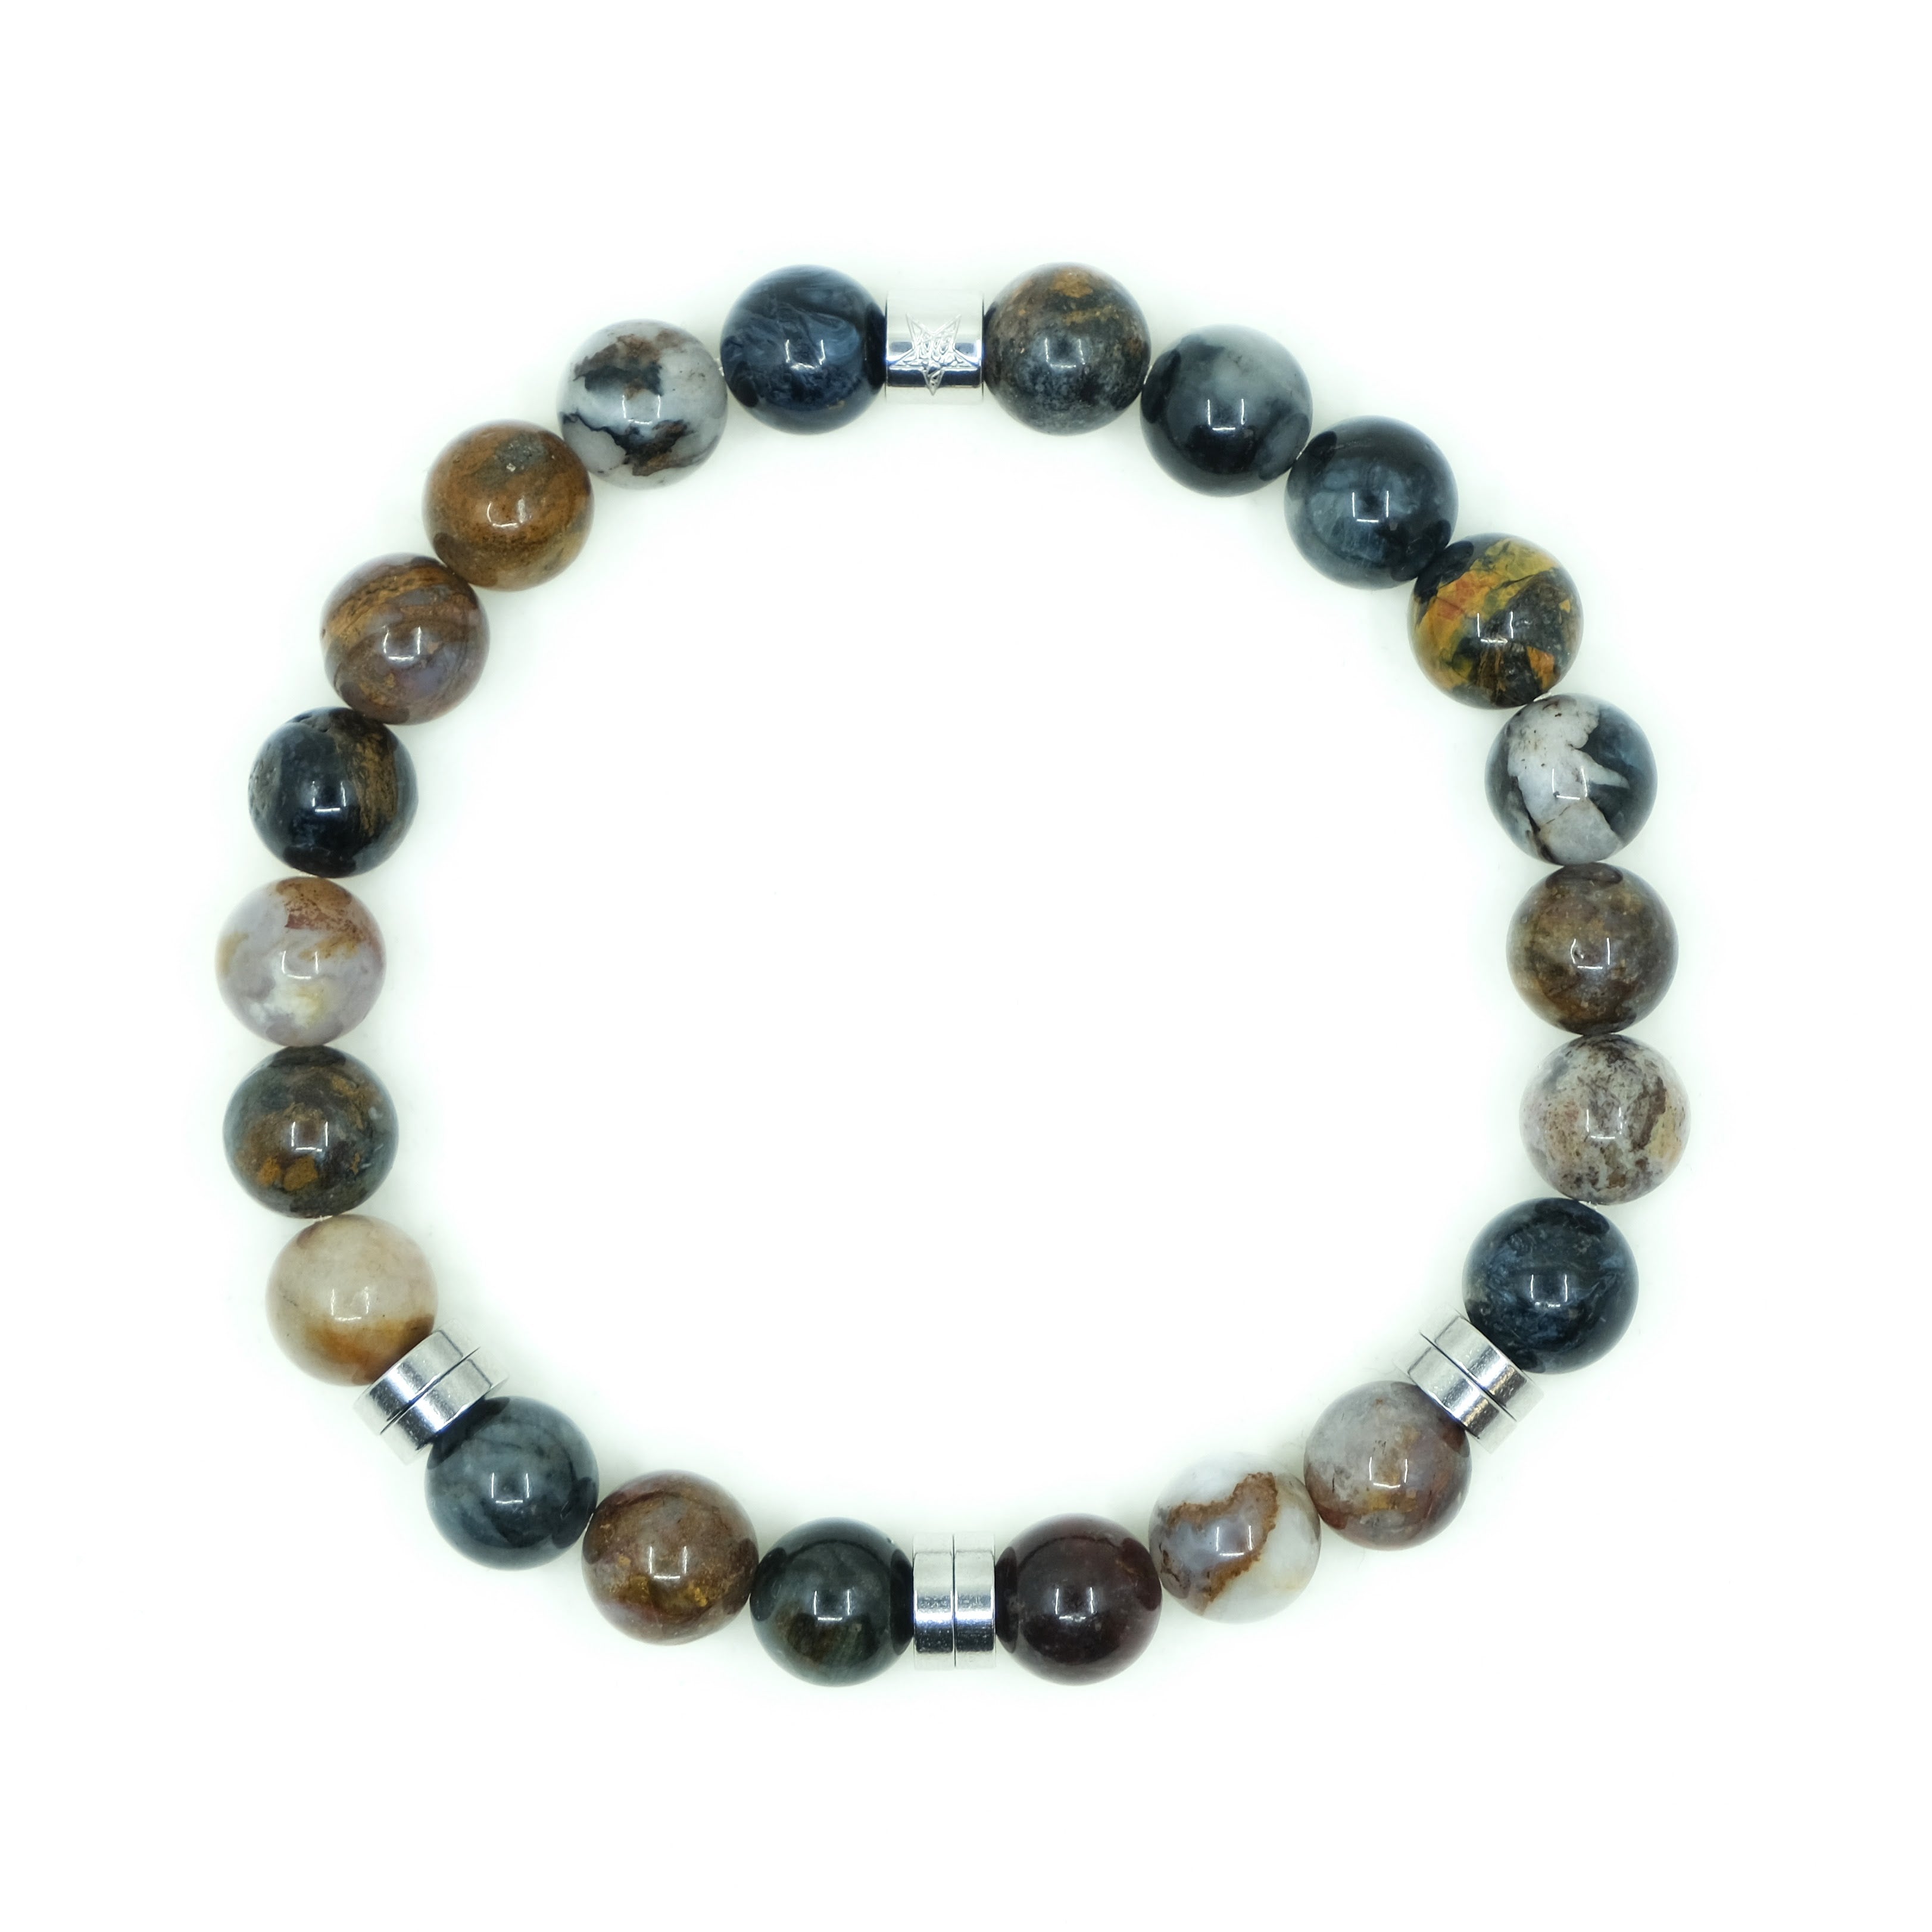 A Pietersite gemstone bracelet with stainless steel accessories from above